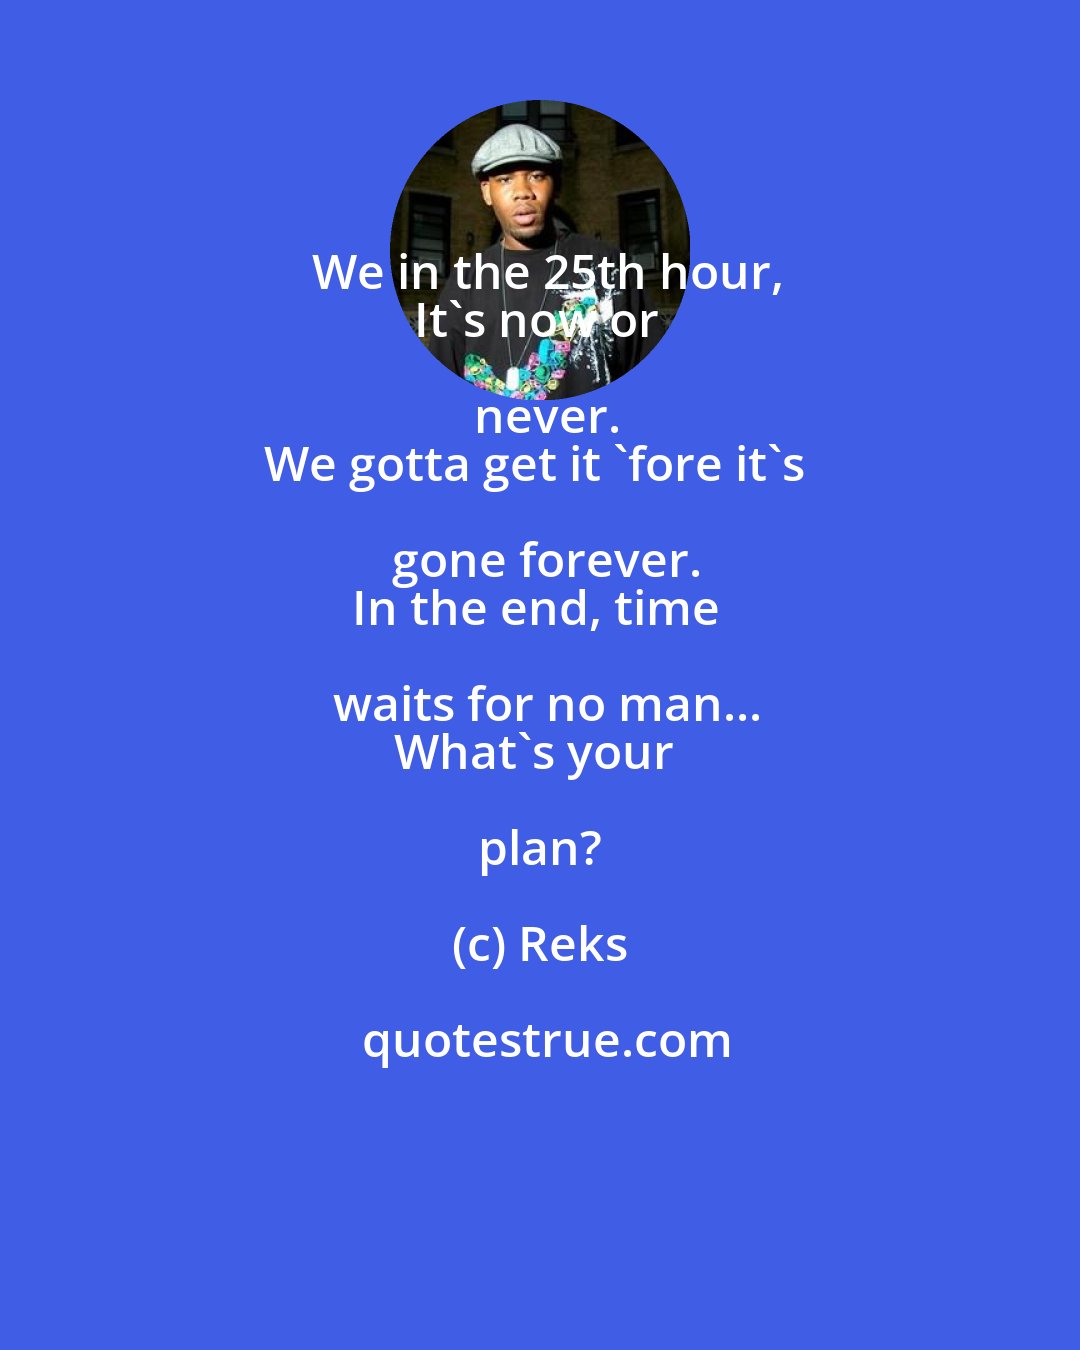 Reks: We in the 25th hour,
It's now or never.
We gotta get it 'fore it's gone forever.
In the end, time waits for no man...
What's your plan?